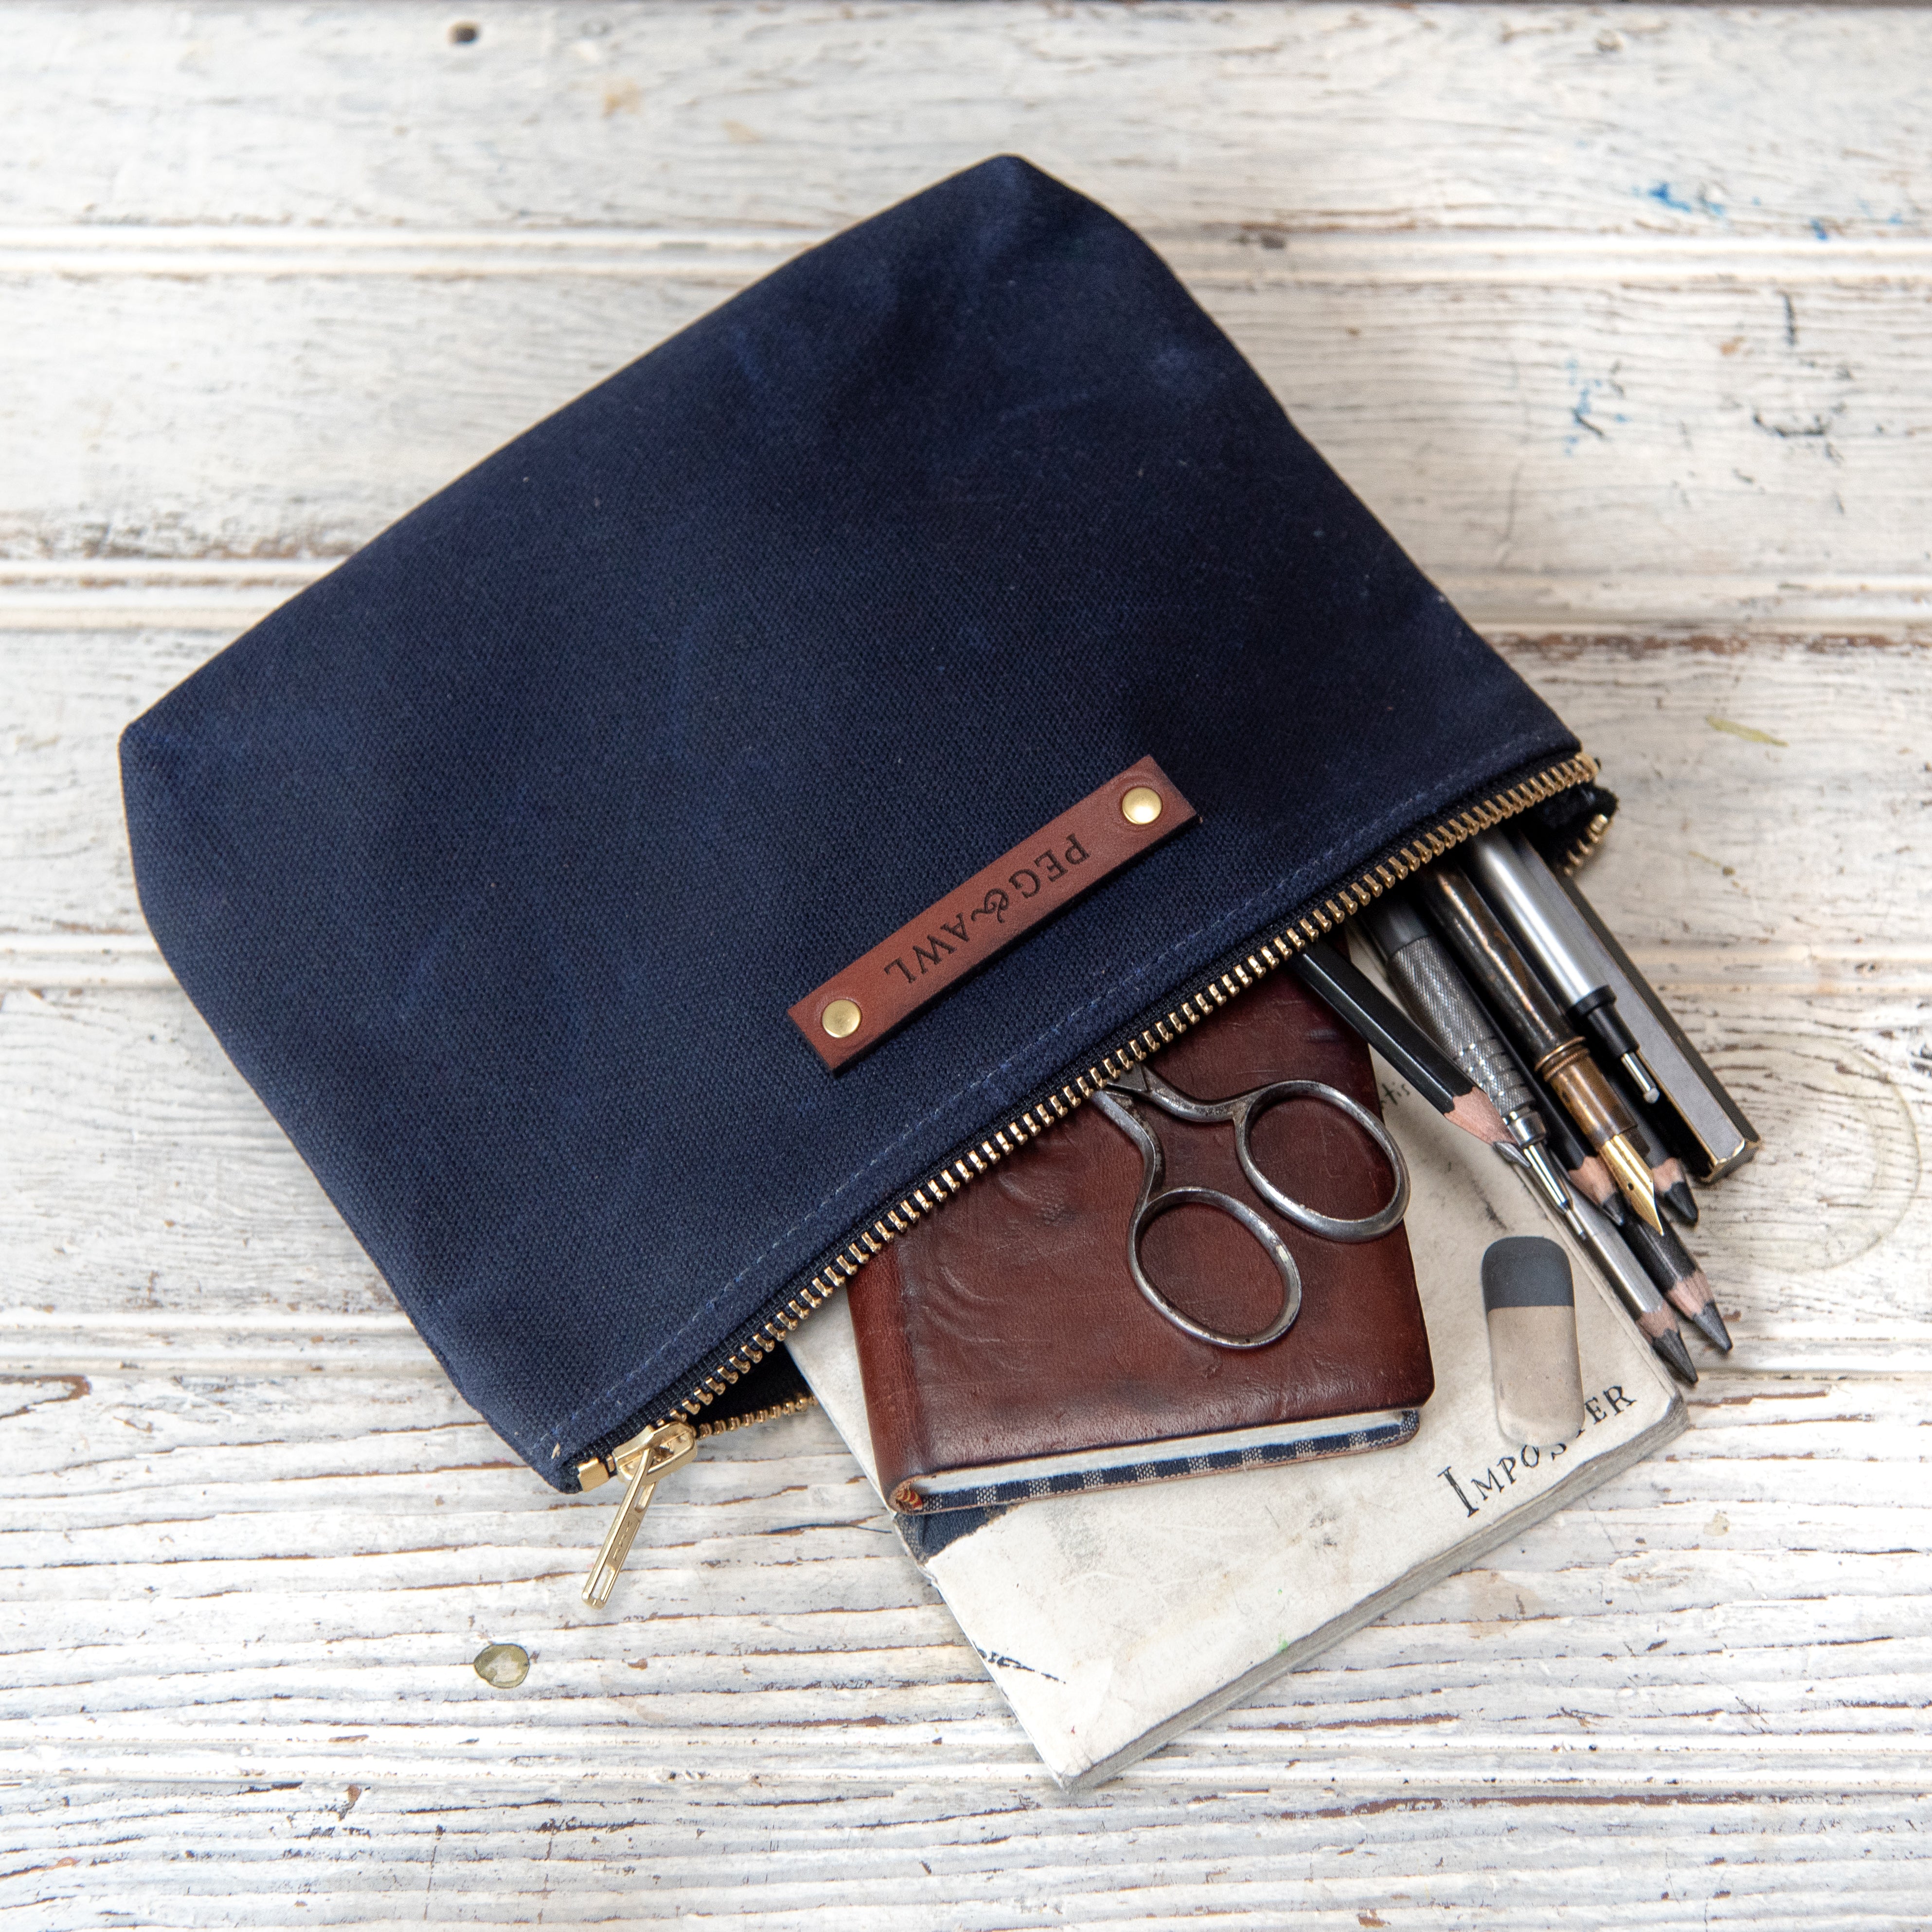 No. 6: The Keeper Pouch